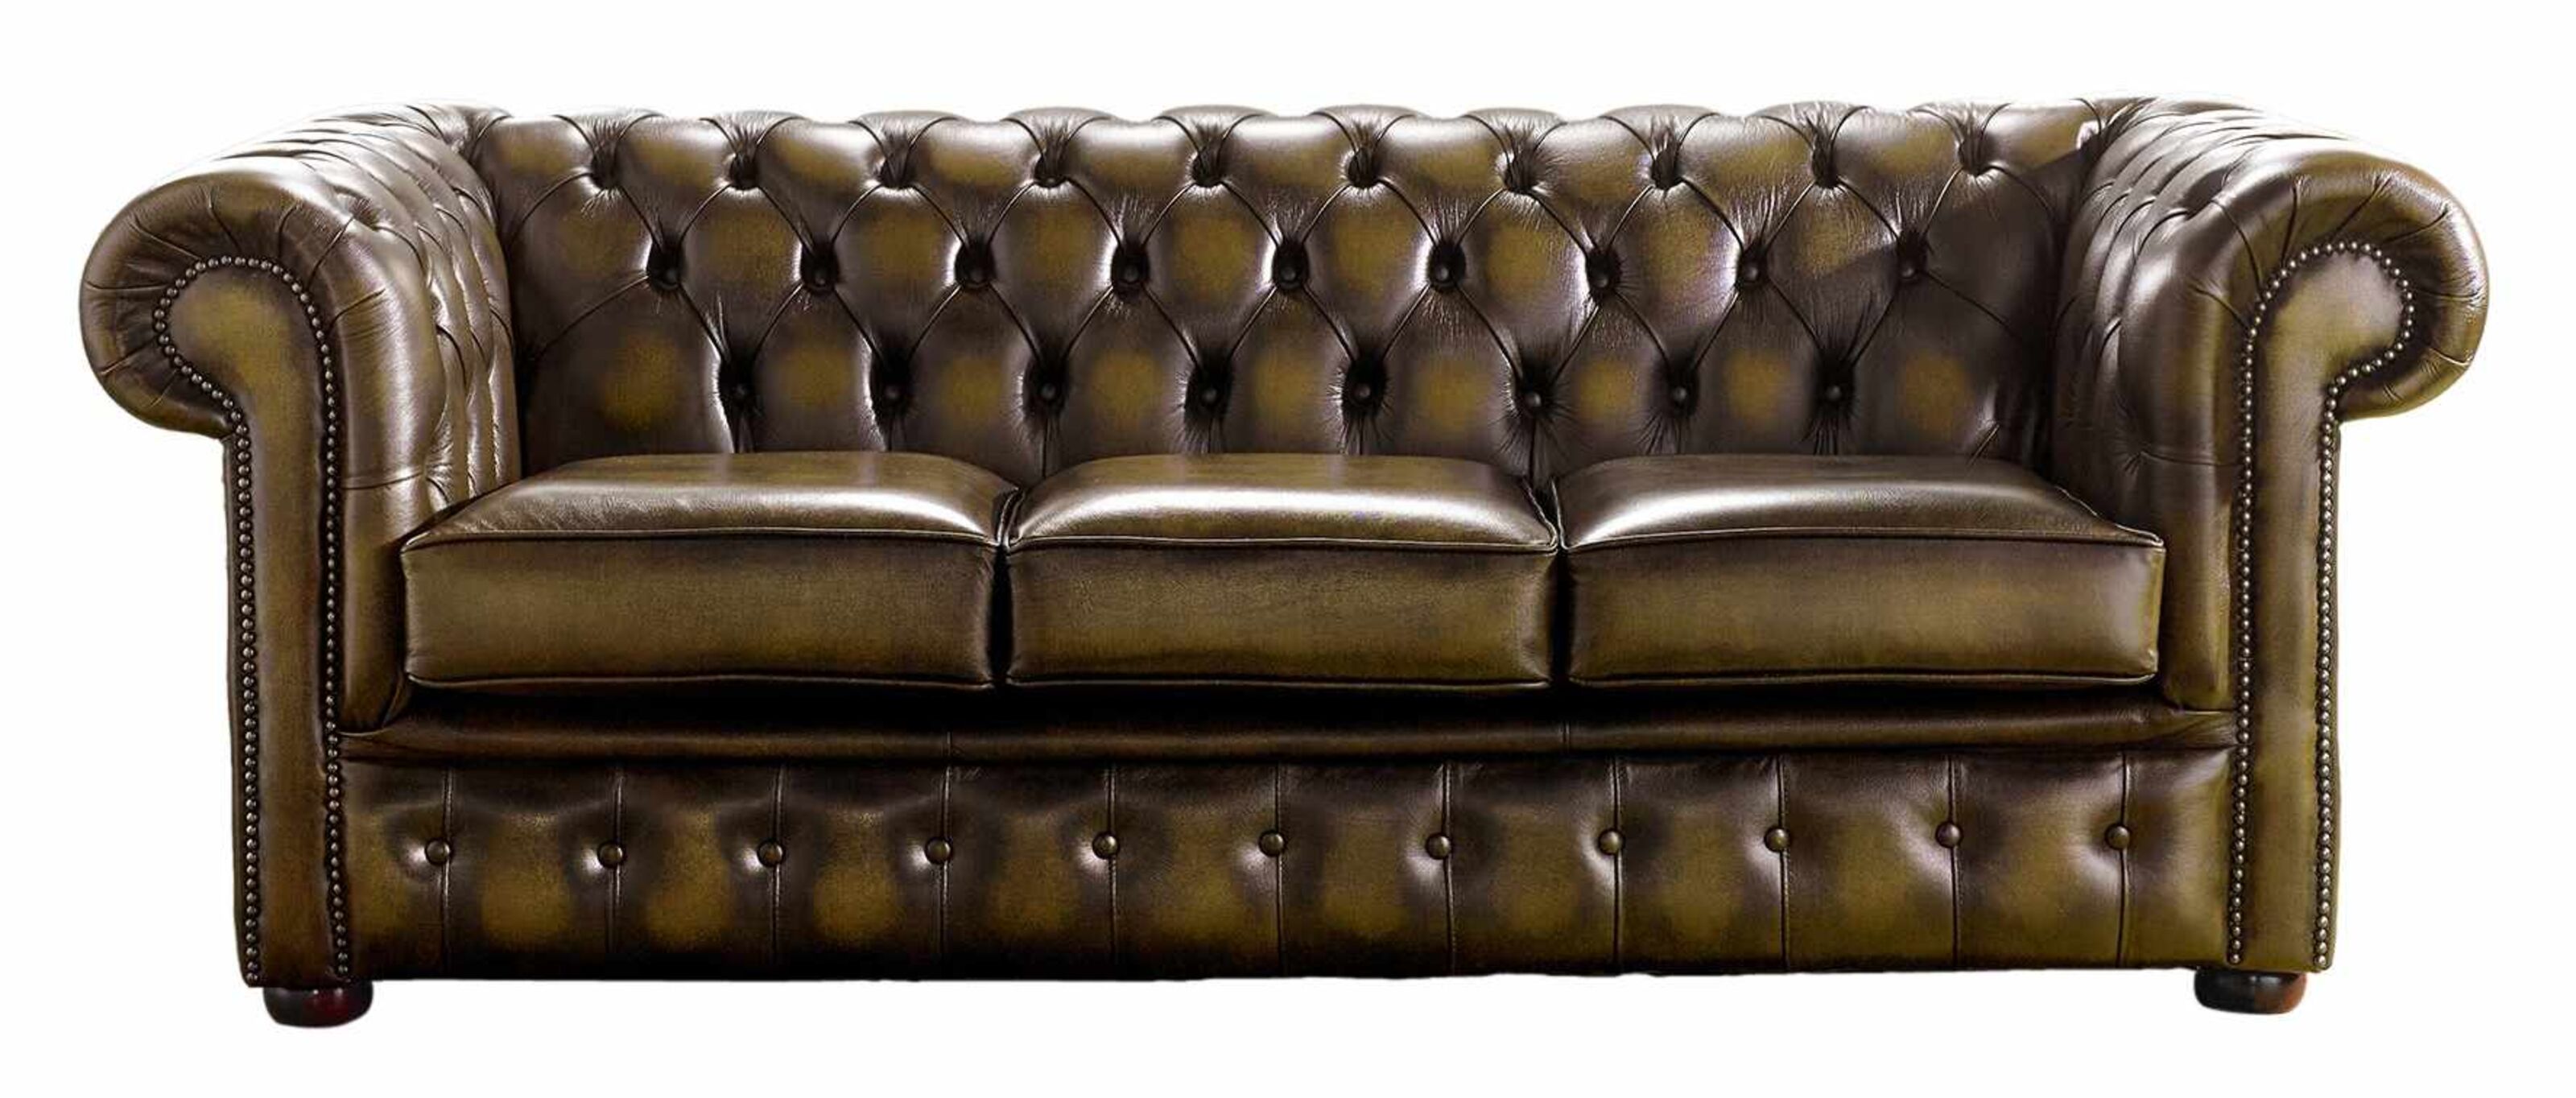 Stylish Protection Arm Covers for Chesterfield Sofas  %Post Title